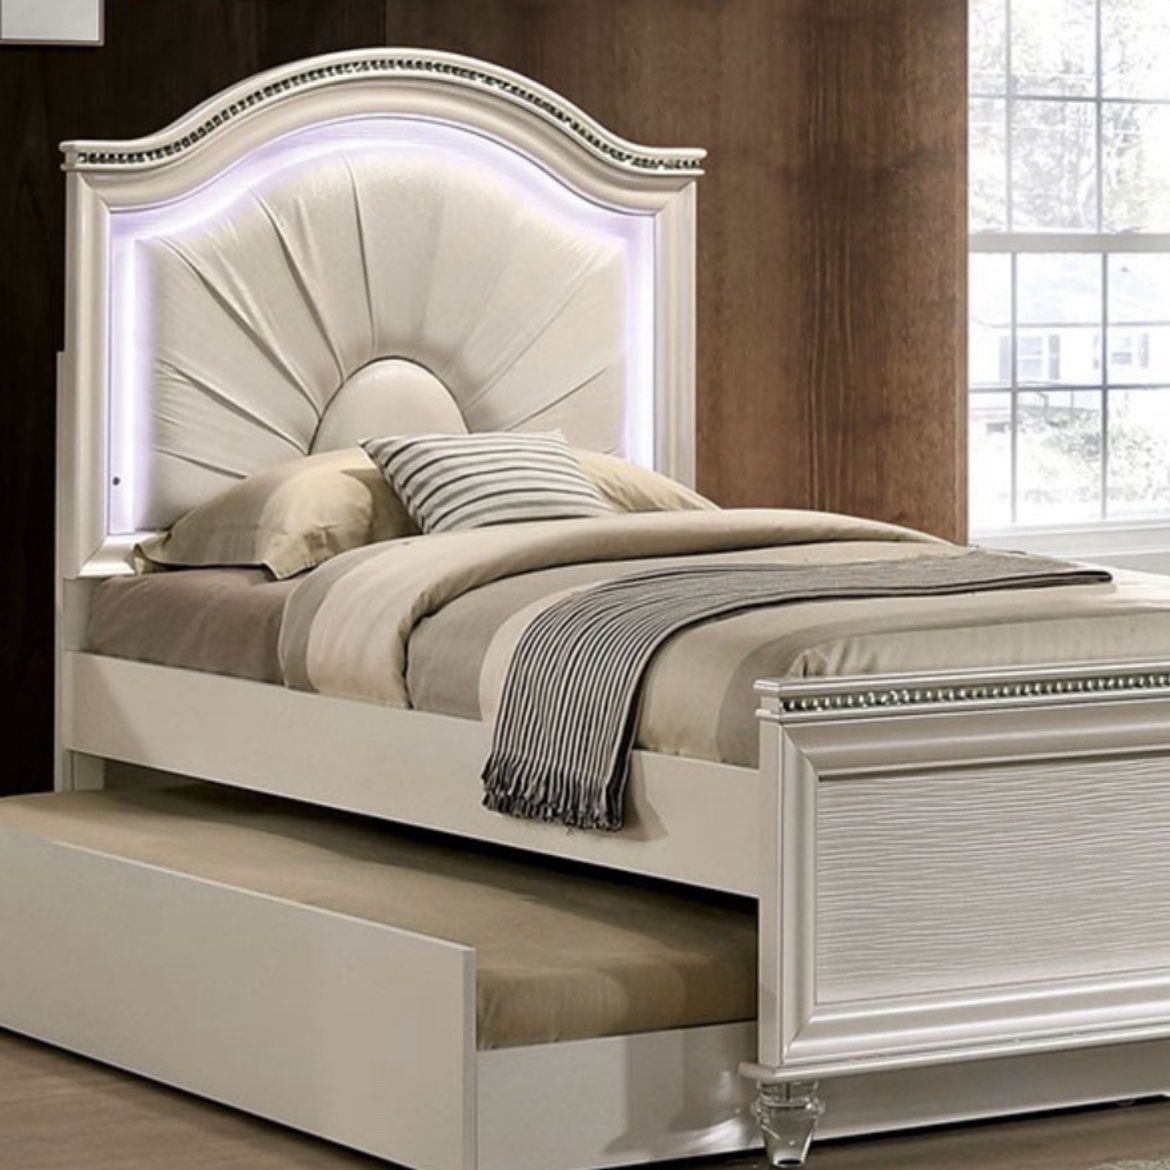 SPECIAL DEAL!!❤️‍🔥✨TWIN PEARL WHITE BED🔥(mattress is not included)⚡️Visit Our Showroom📍Apply Now✅ Delivery Express🚚Order Online💻